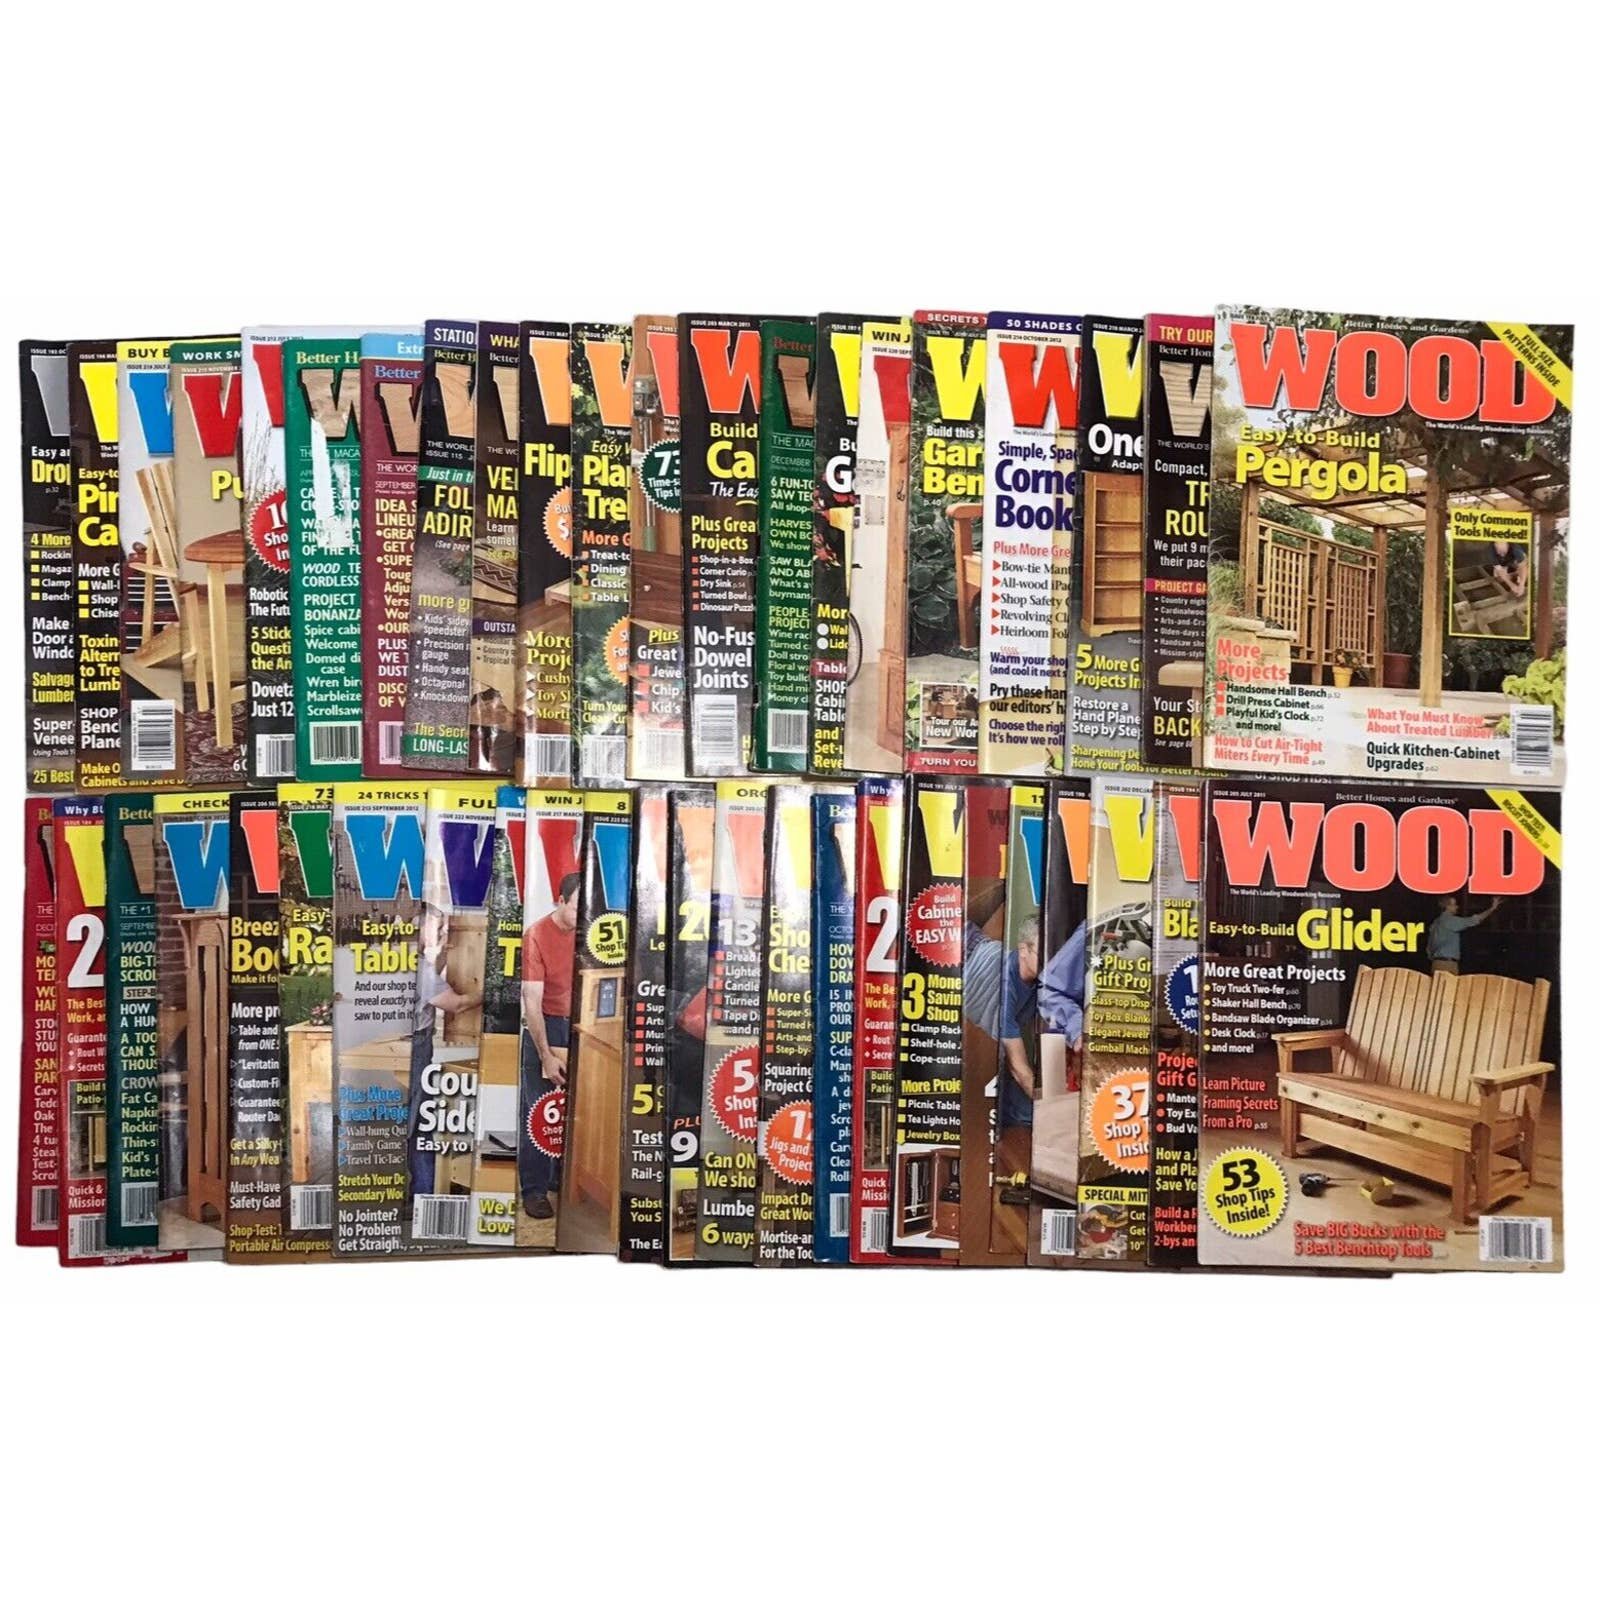 Better Homes and Gardens Wood Woodworking Magazine Lot of 45 DIY Project Plans awSZC08j0